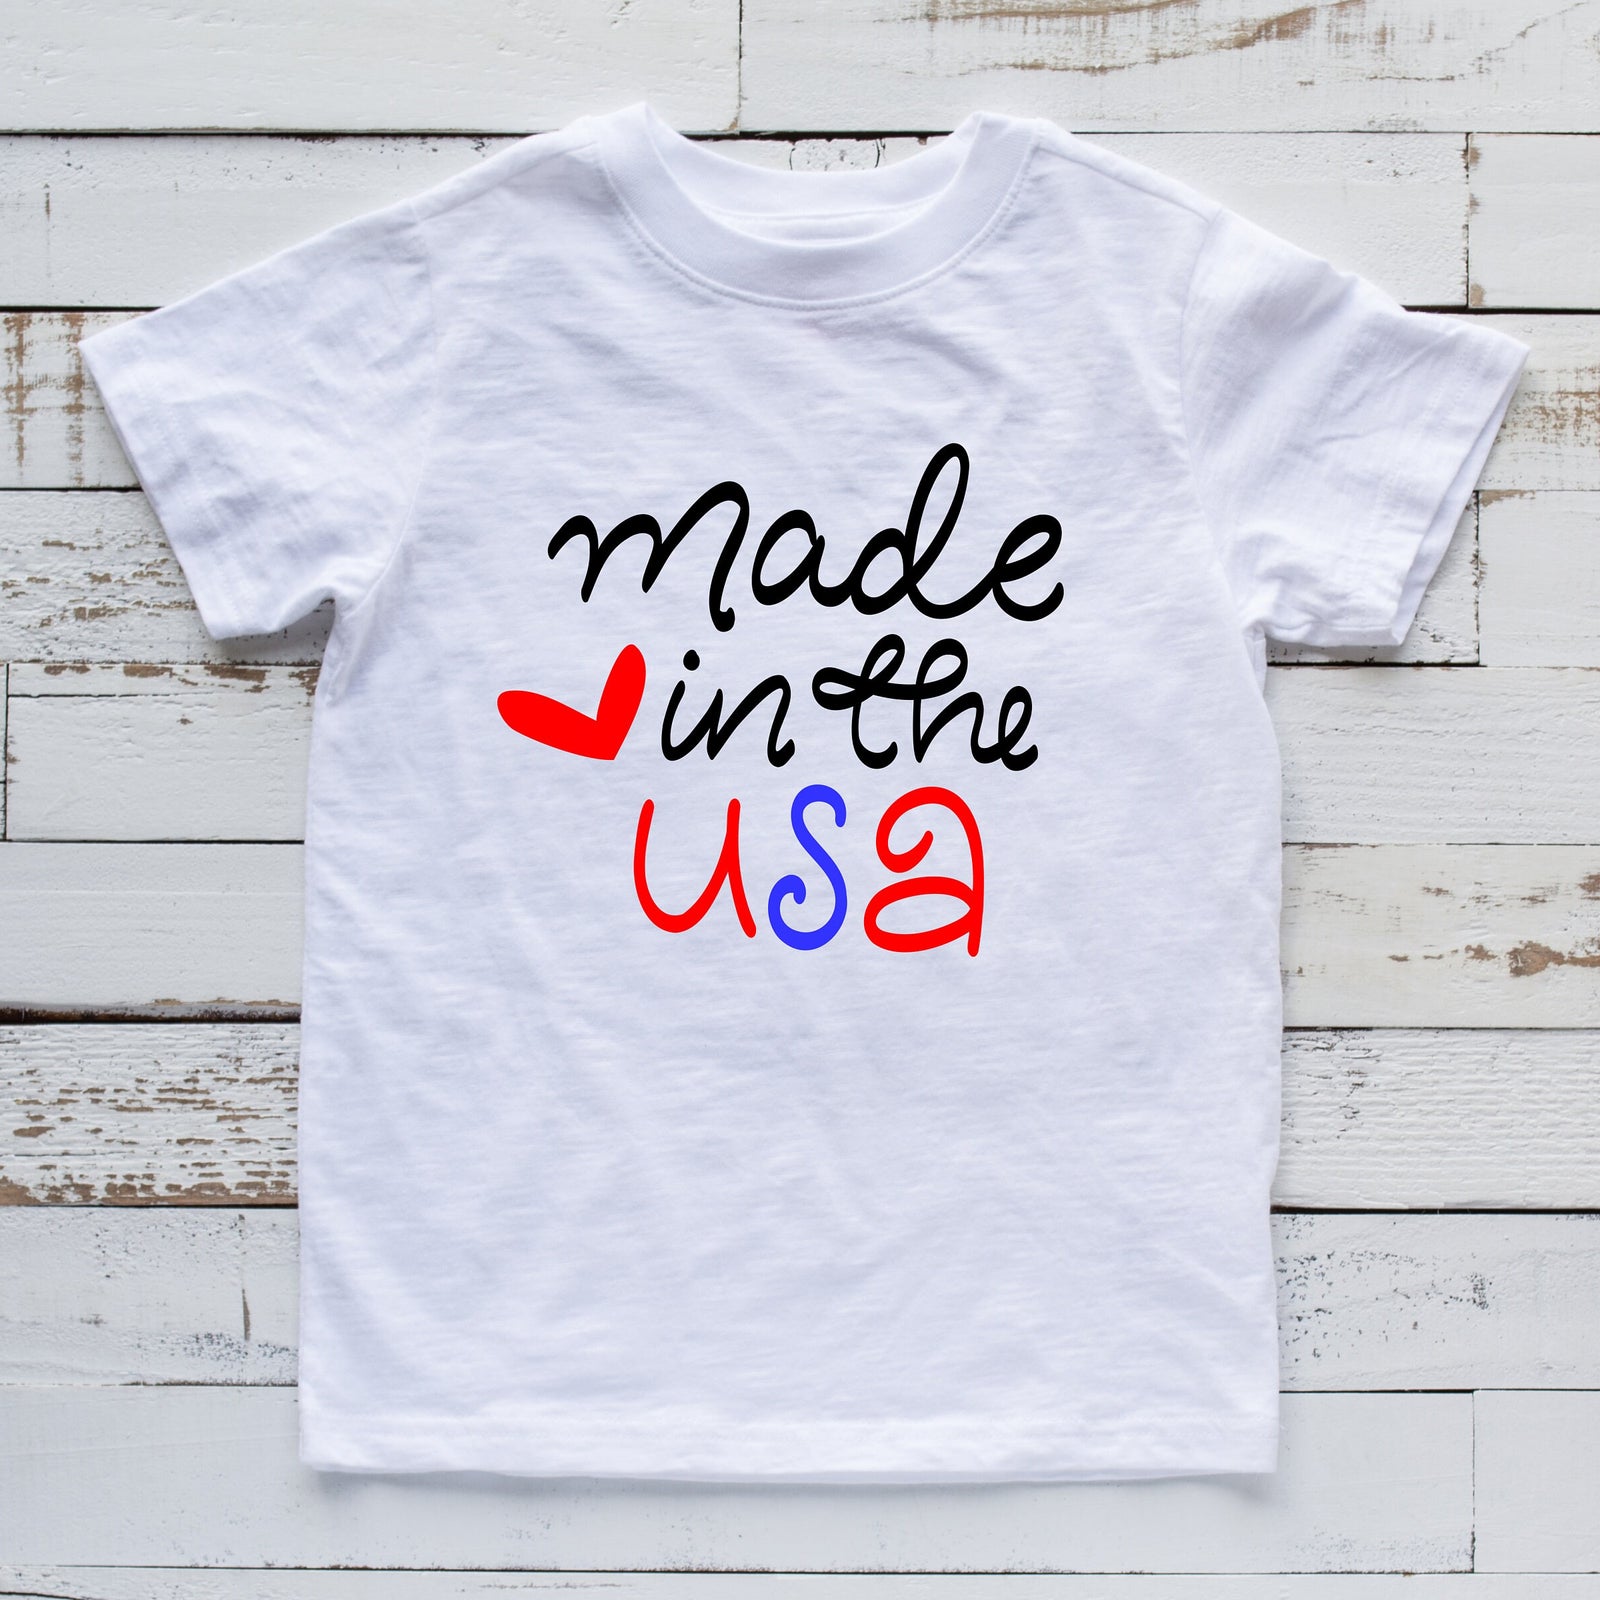 Made in the USA - Youth Fourth Of July Shirt - Memorial Day - Red White and Blue